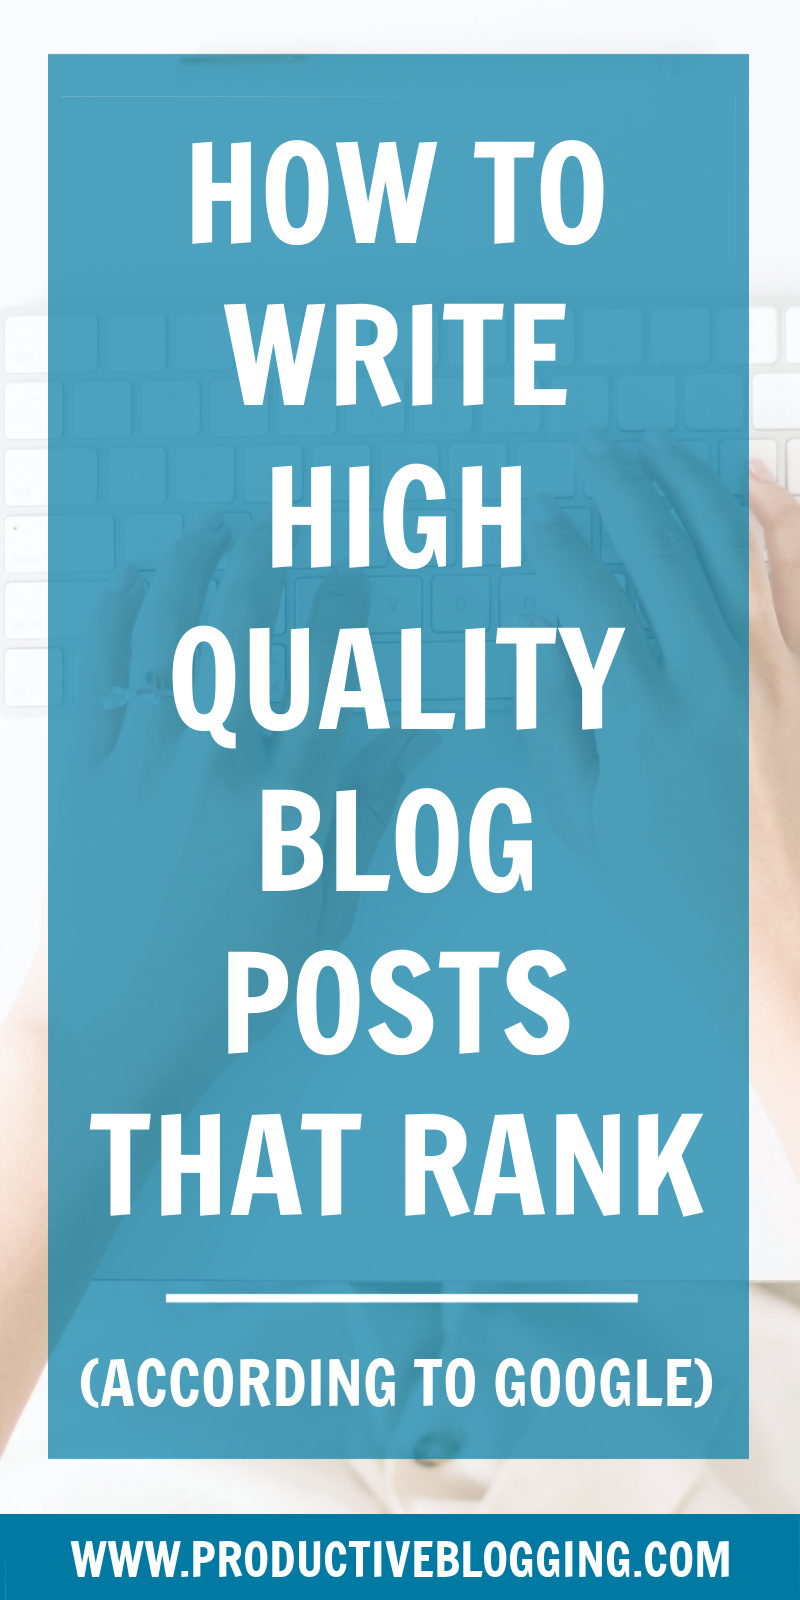 Google has repeatedly said that the best way to improve your rankings is to create consistently high-quality content. But what does that mean? Here’s how to write high quality blog posts that rank (according to Google). #highqualitycontent #highqualityblogposts #EAT #googlerankingfactors #googleSEO #SEO #SEOtips #SEOhacks #searchengineoptimization #SEOforbloggers #SEOforbeginners #beginnersSEO #blogSEO #growyourblog #bloggrowth #bloggingtips #blogtips #blogging #bloggers #productiveblogging